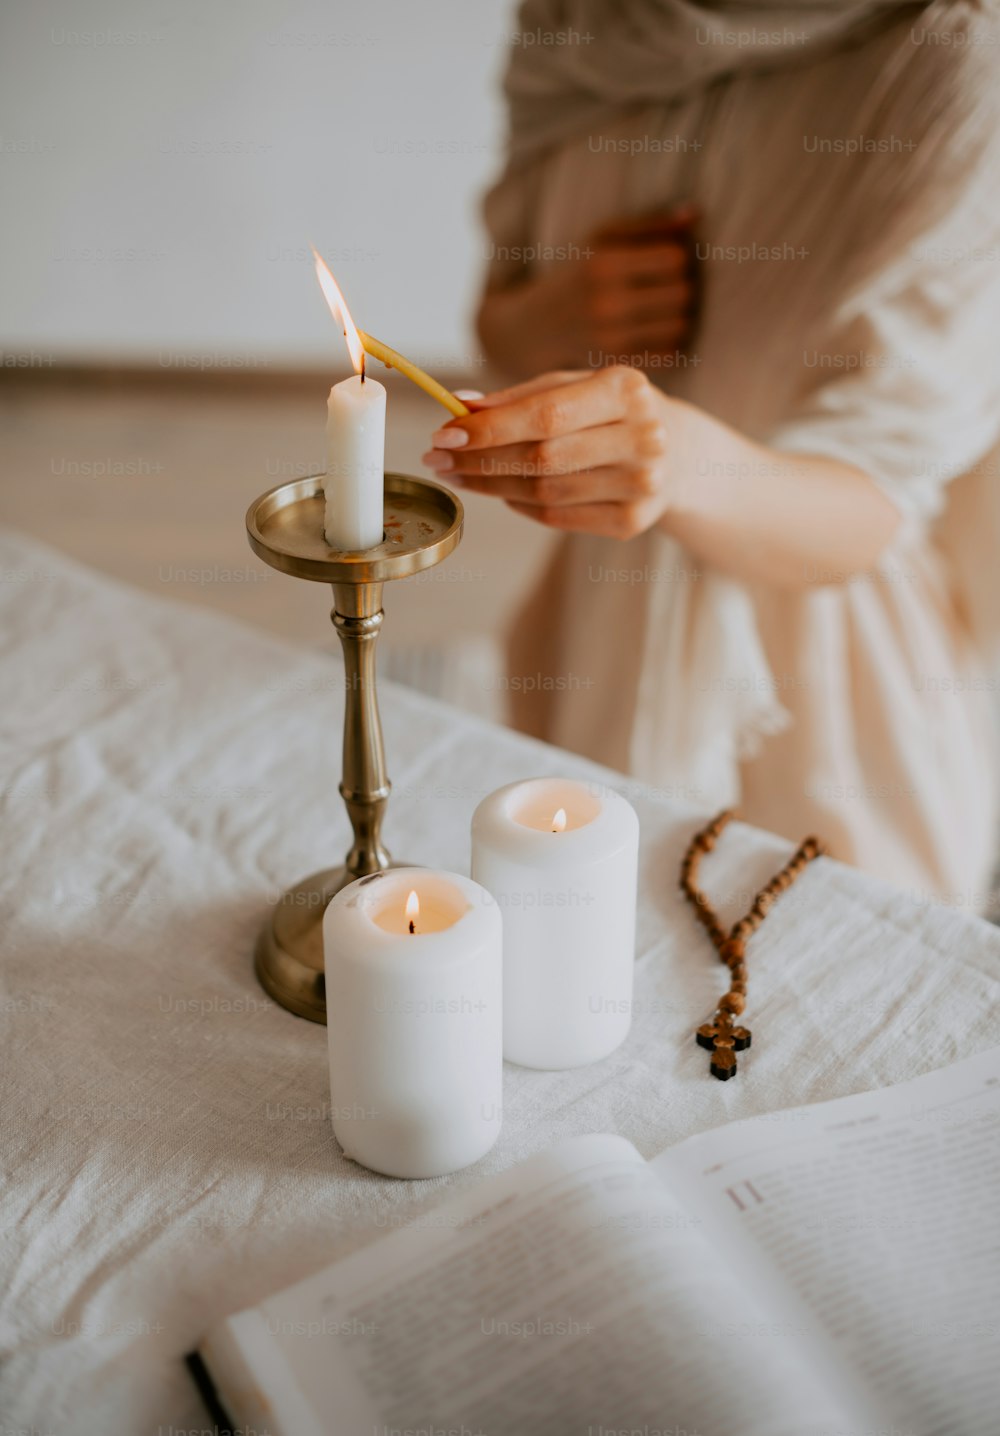 a person lighting a candle on a table